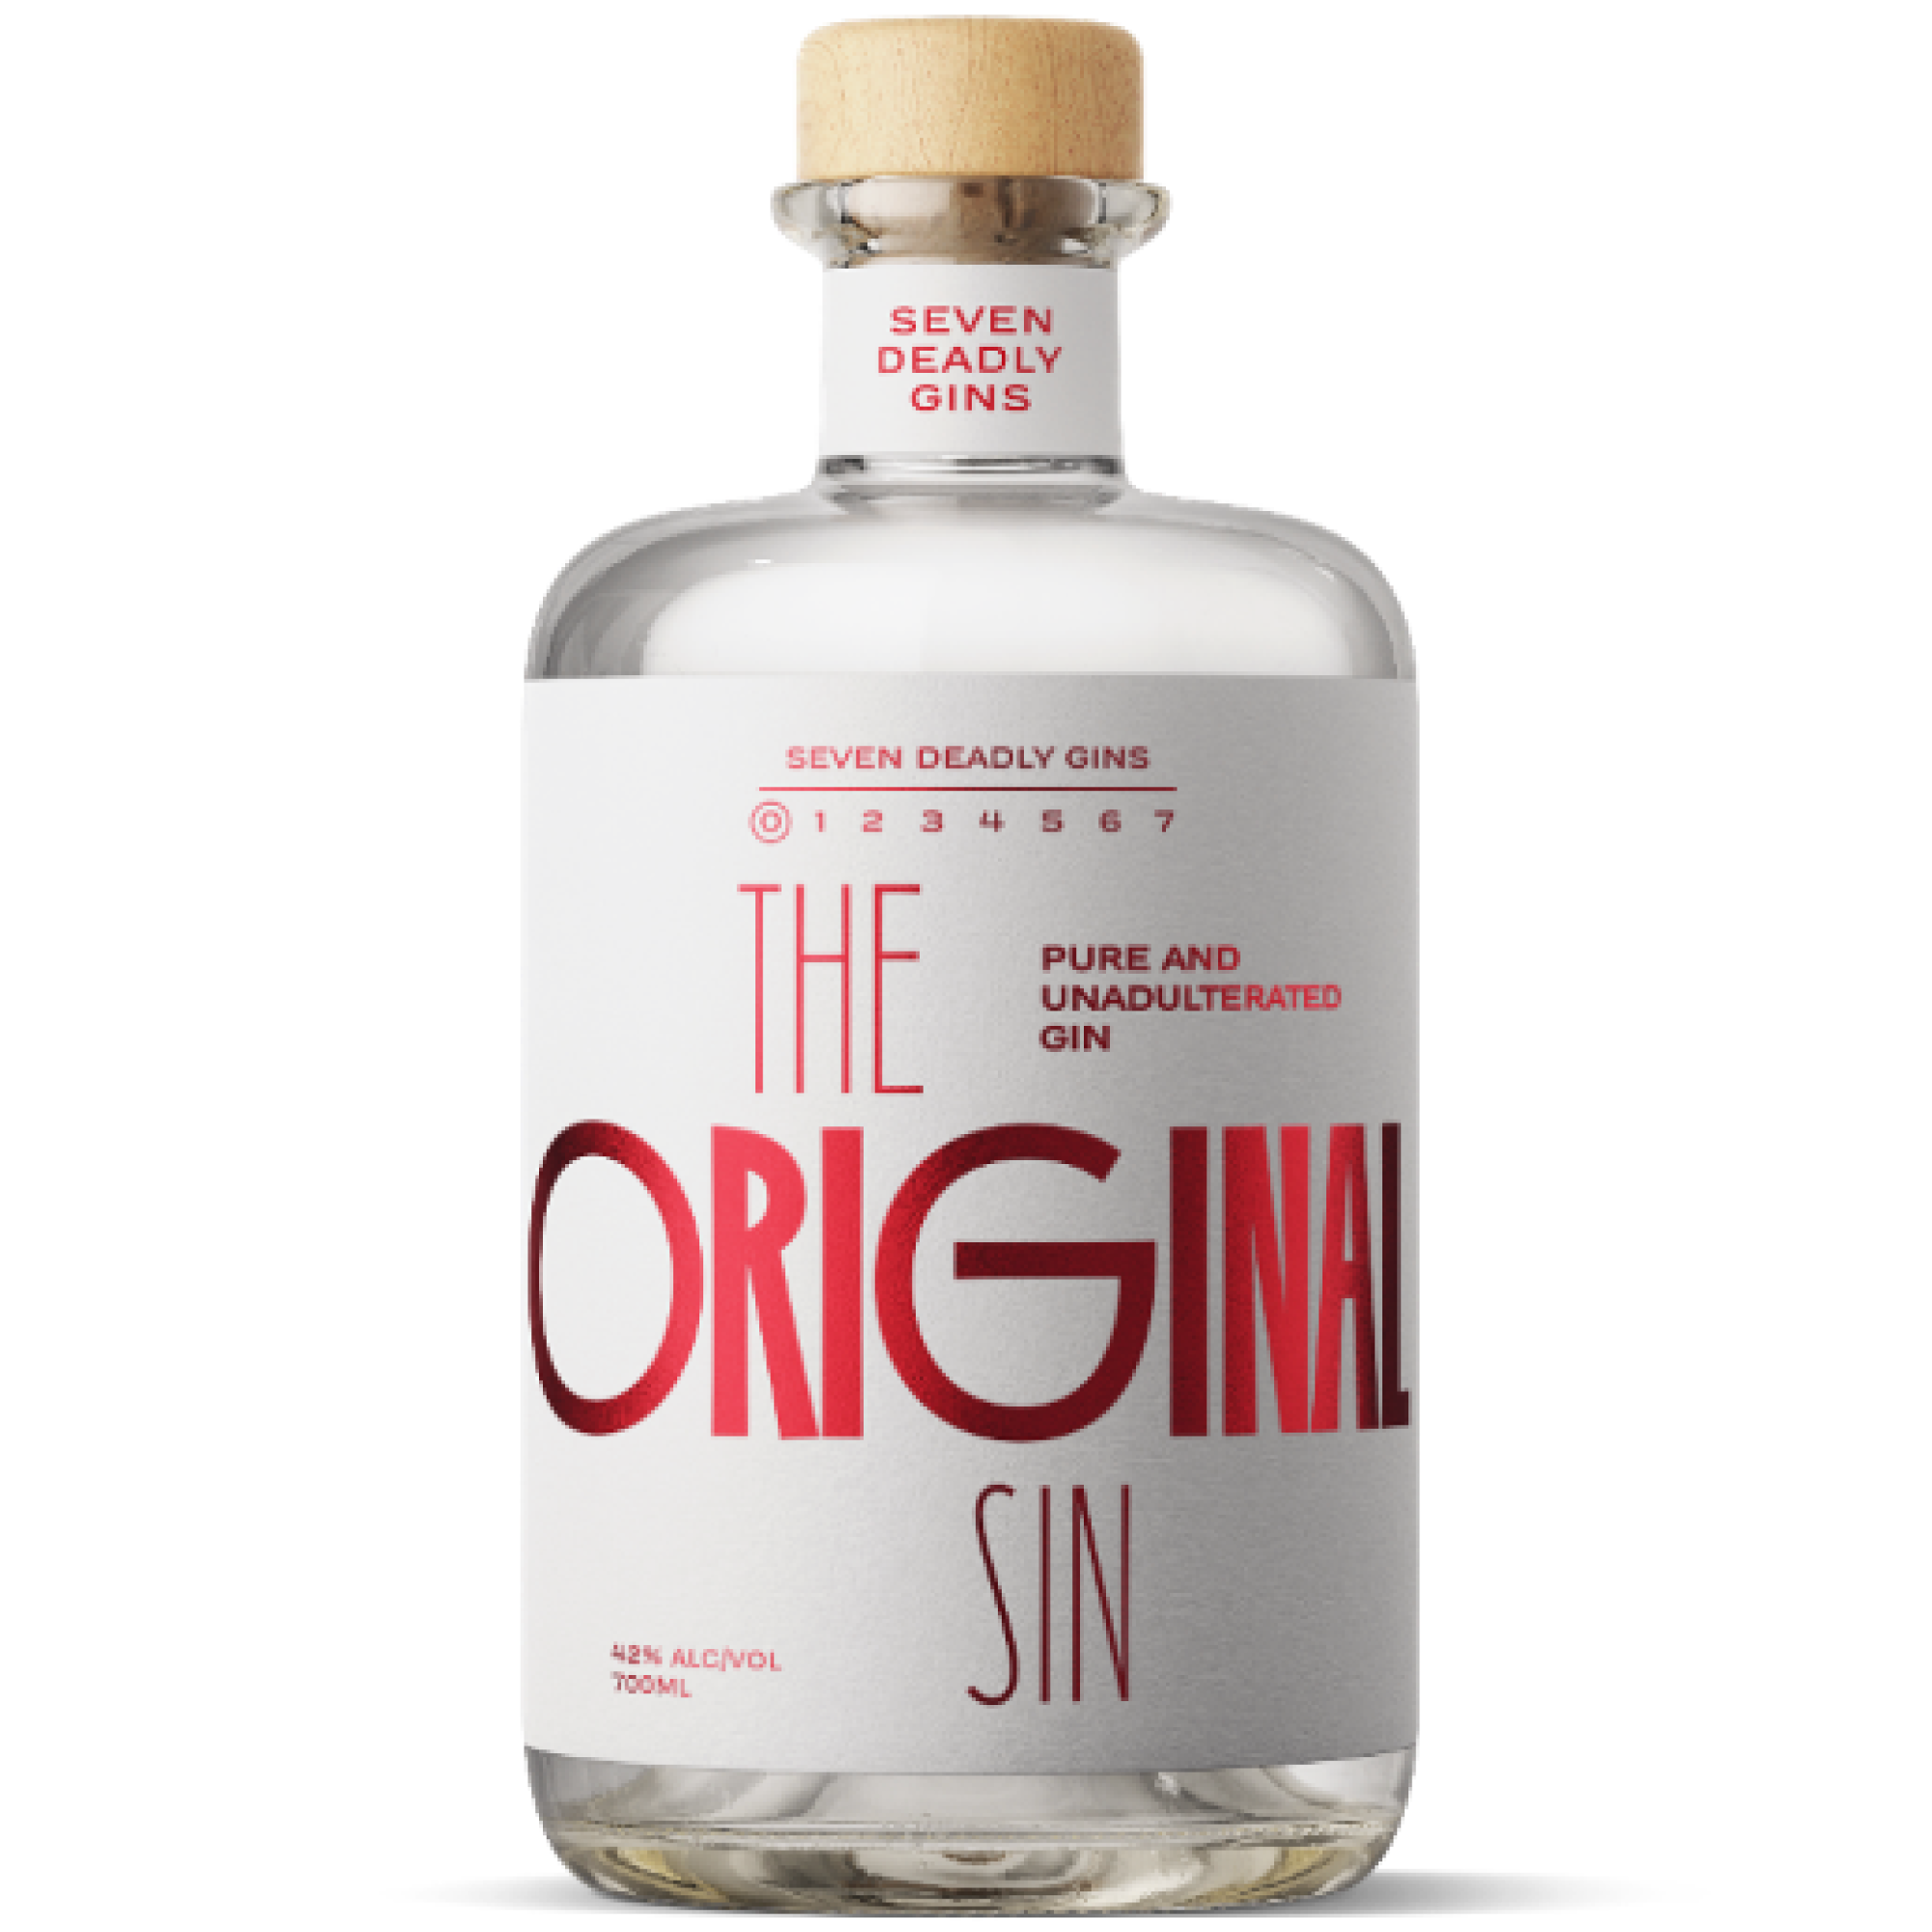 A red and white bottle of Original Sin gin